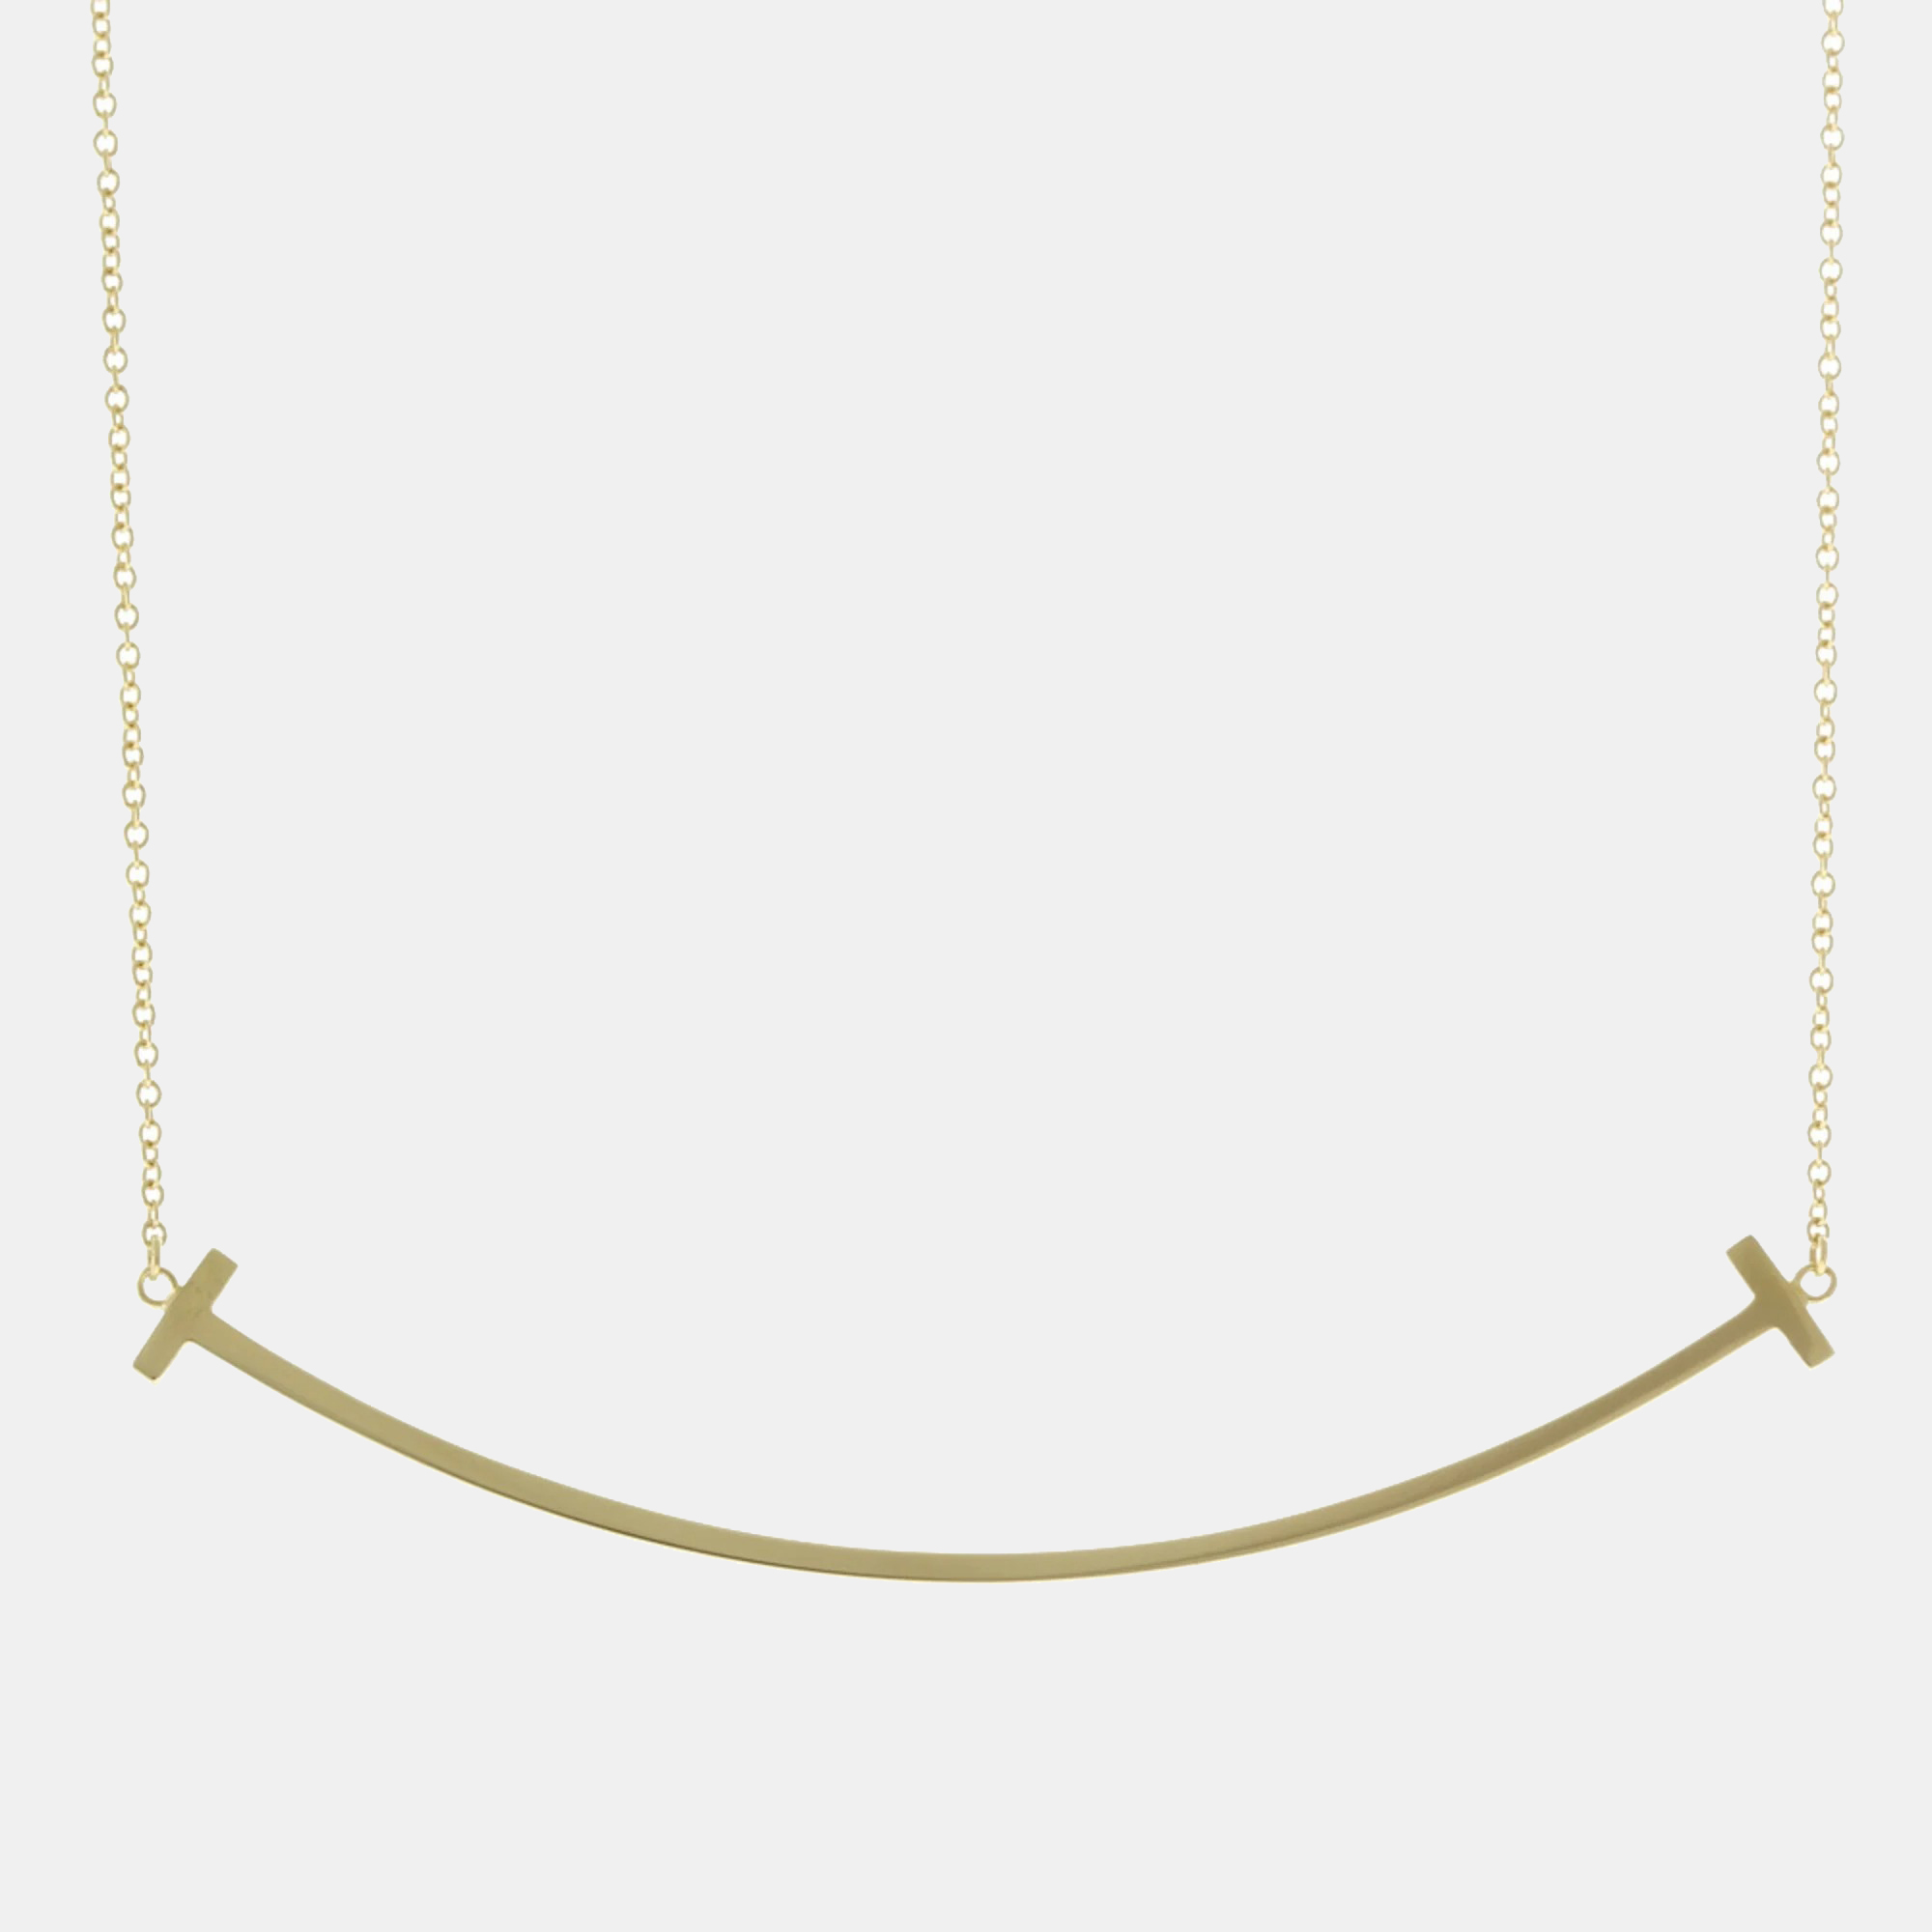 Tiffany & Co. 18K Yellow Gold Extra Large T Smile Pendant Necklace